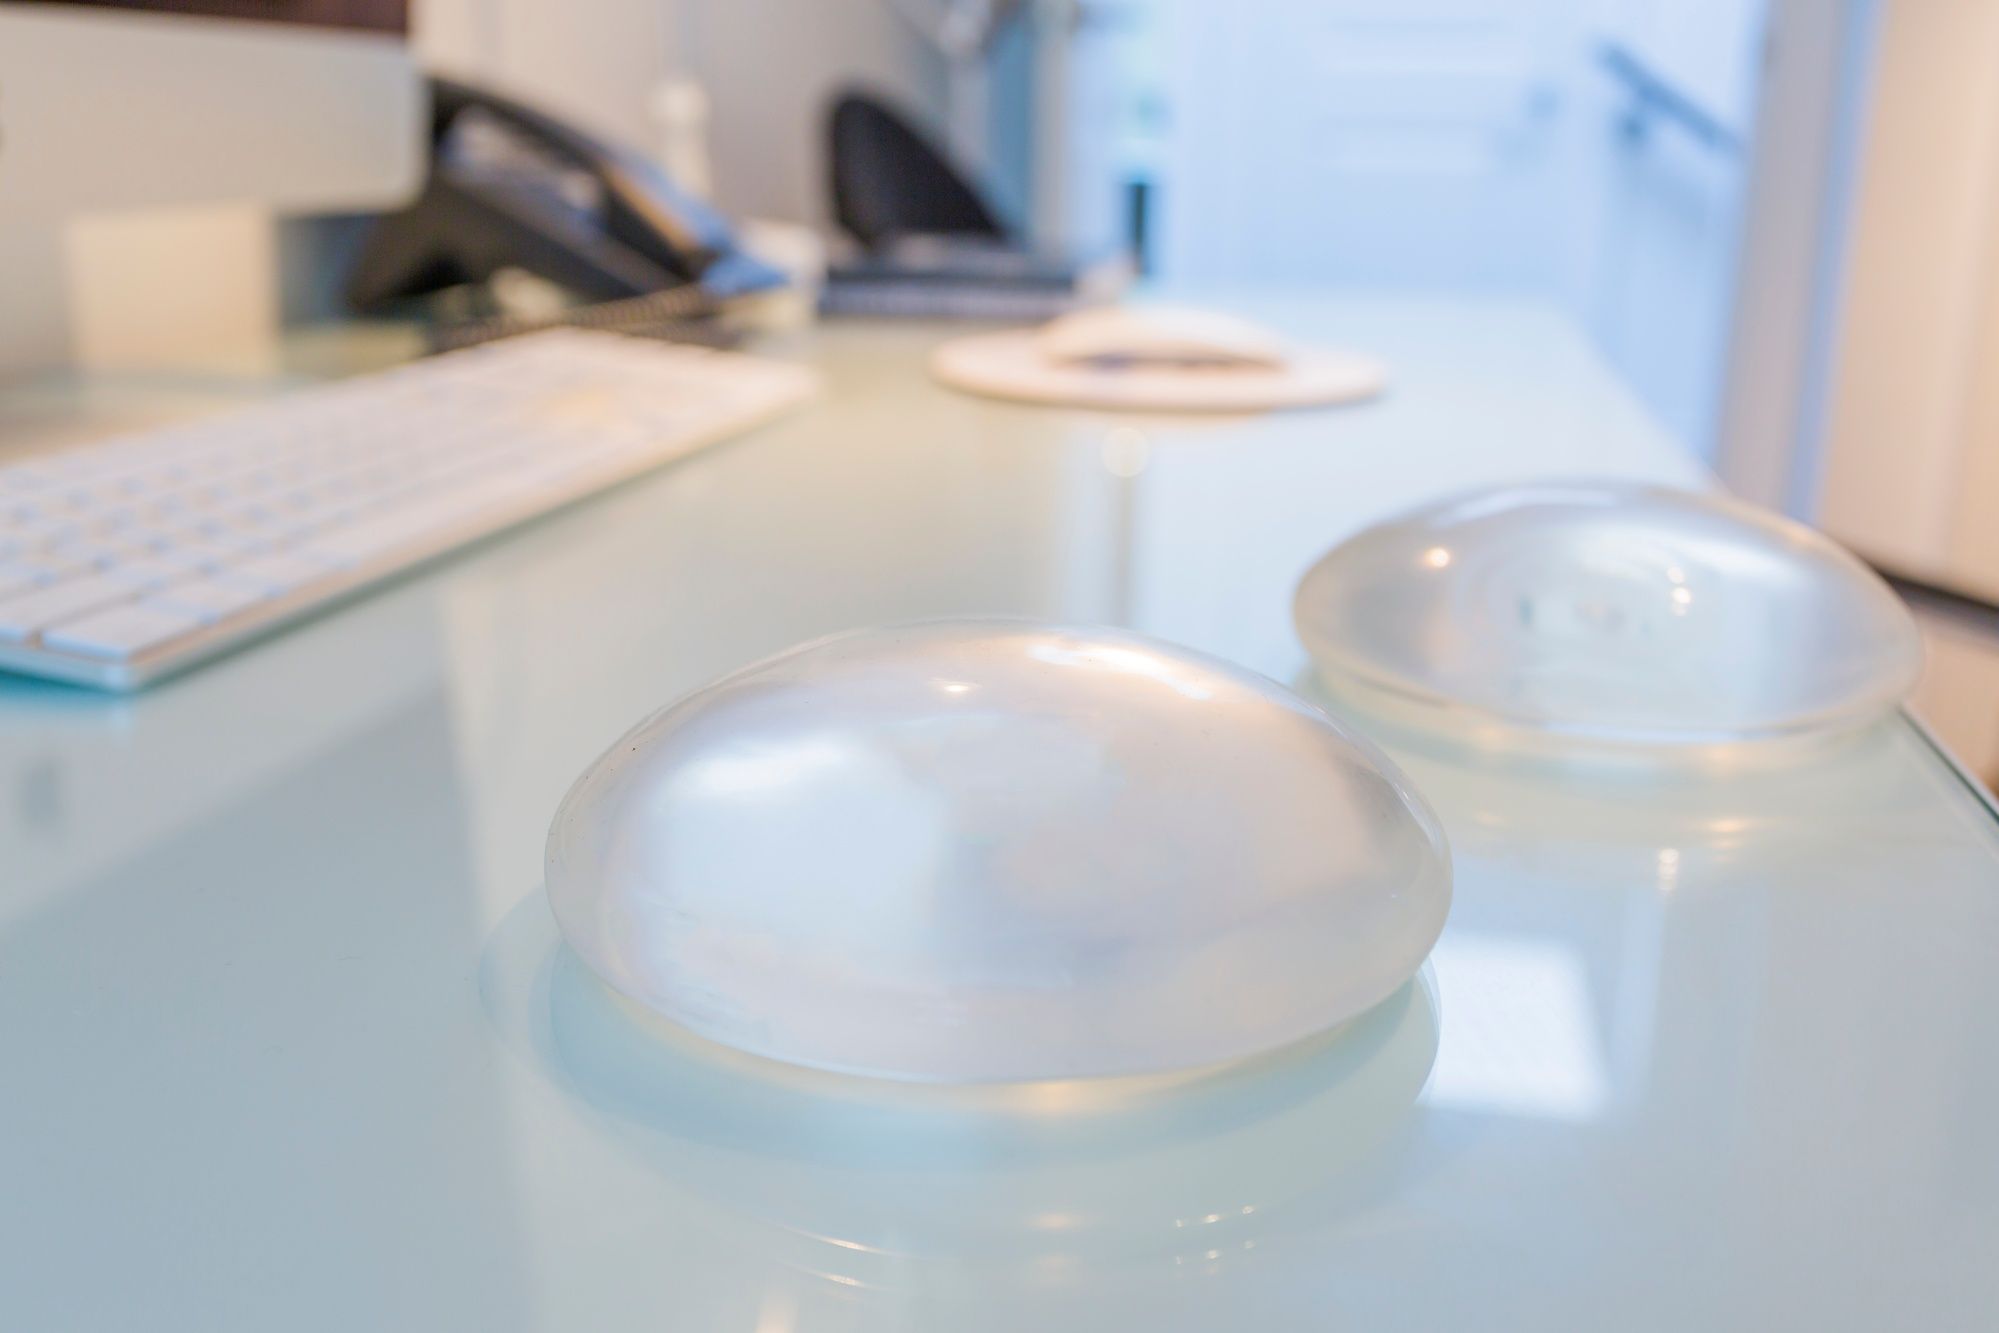 can breast implants cause lymphoma?